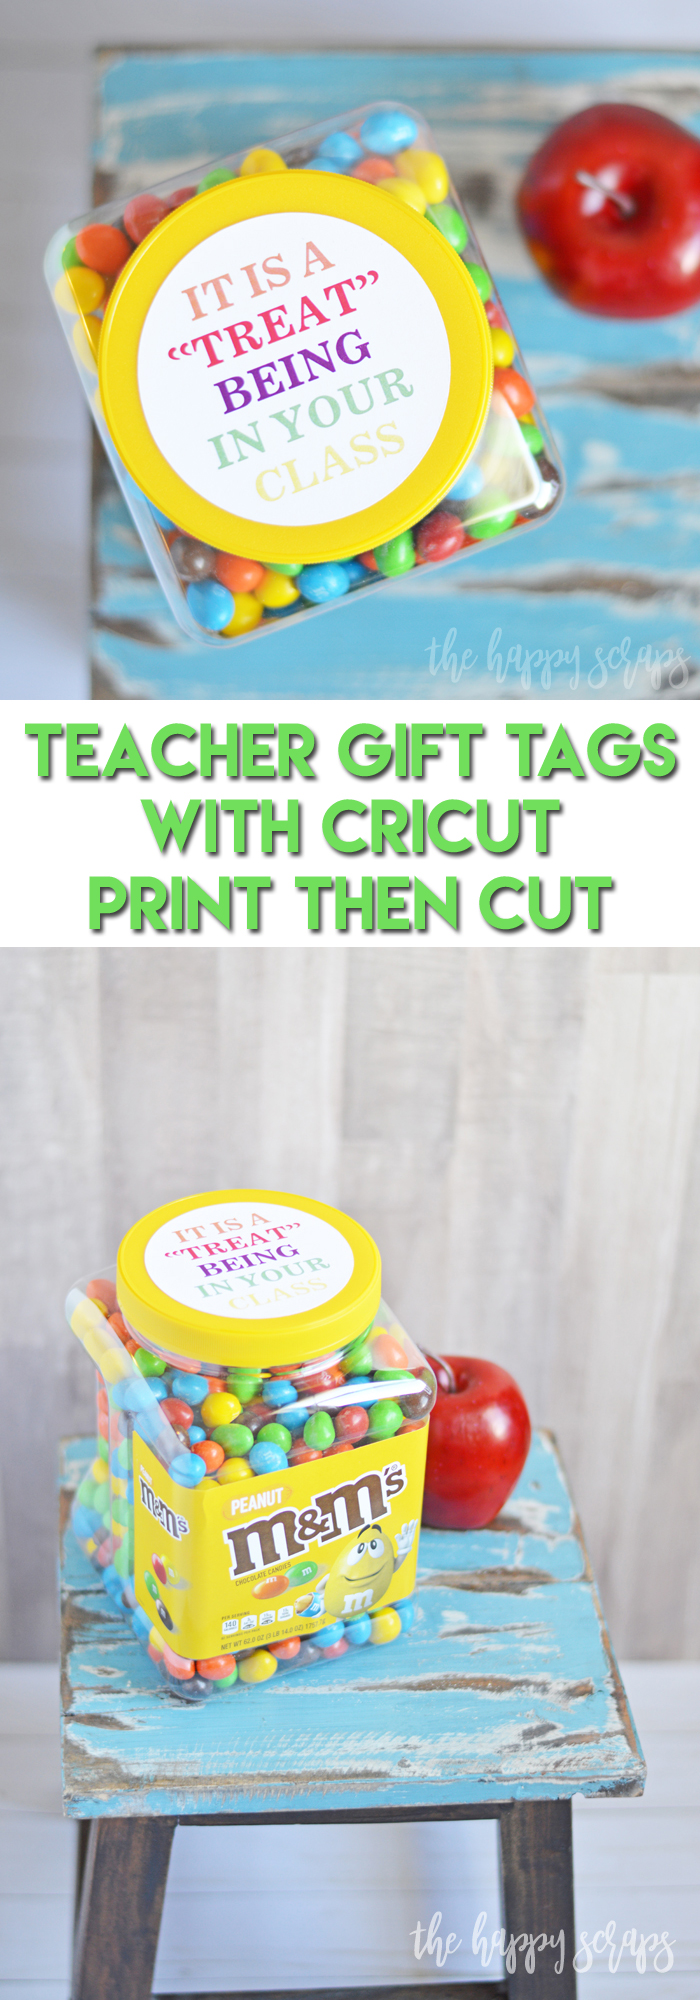 These Teacher Gift Tags with Cricut Print then Cut make gift giving easy! Grab your supplies and you can have these put together in minutes. 